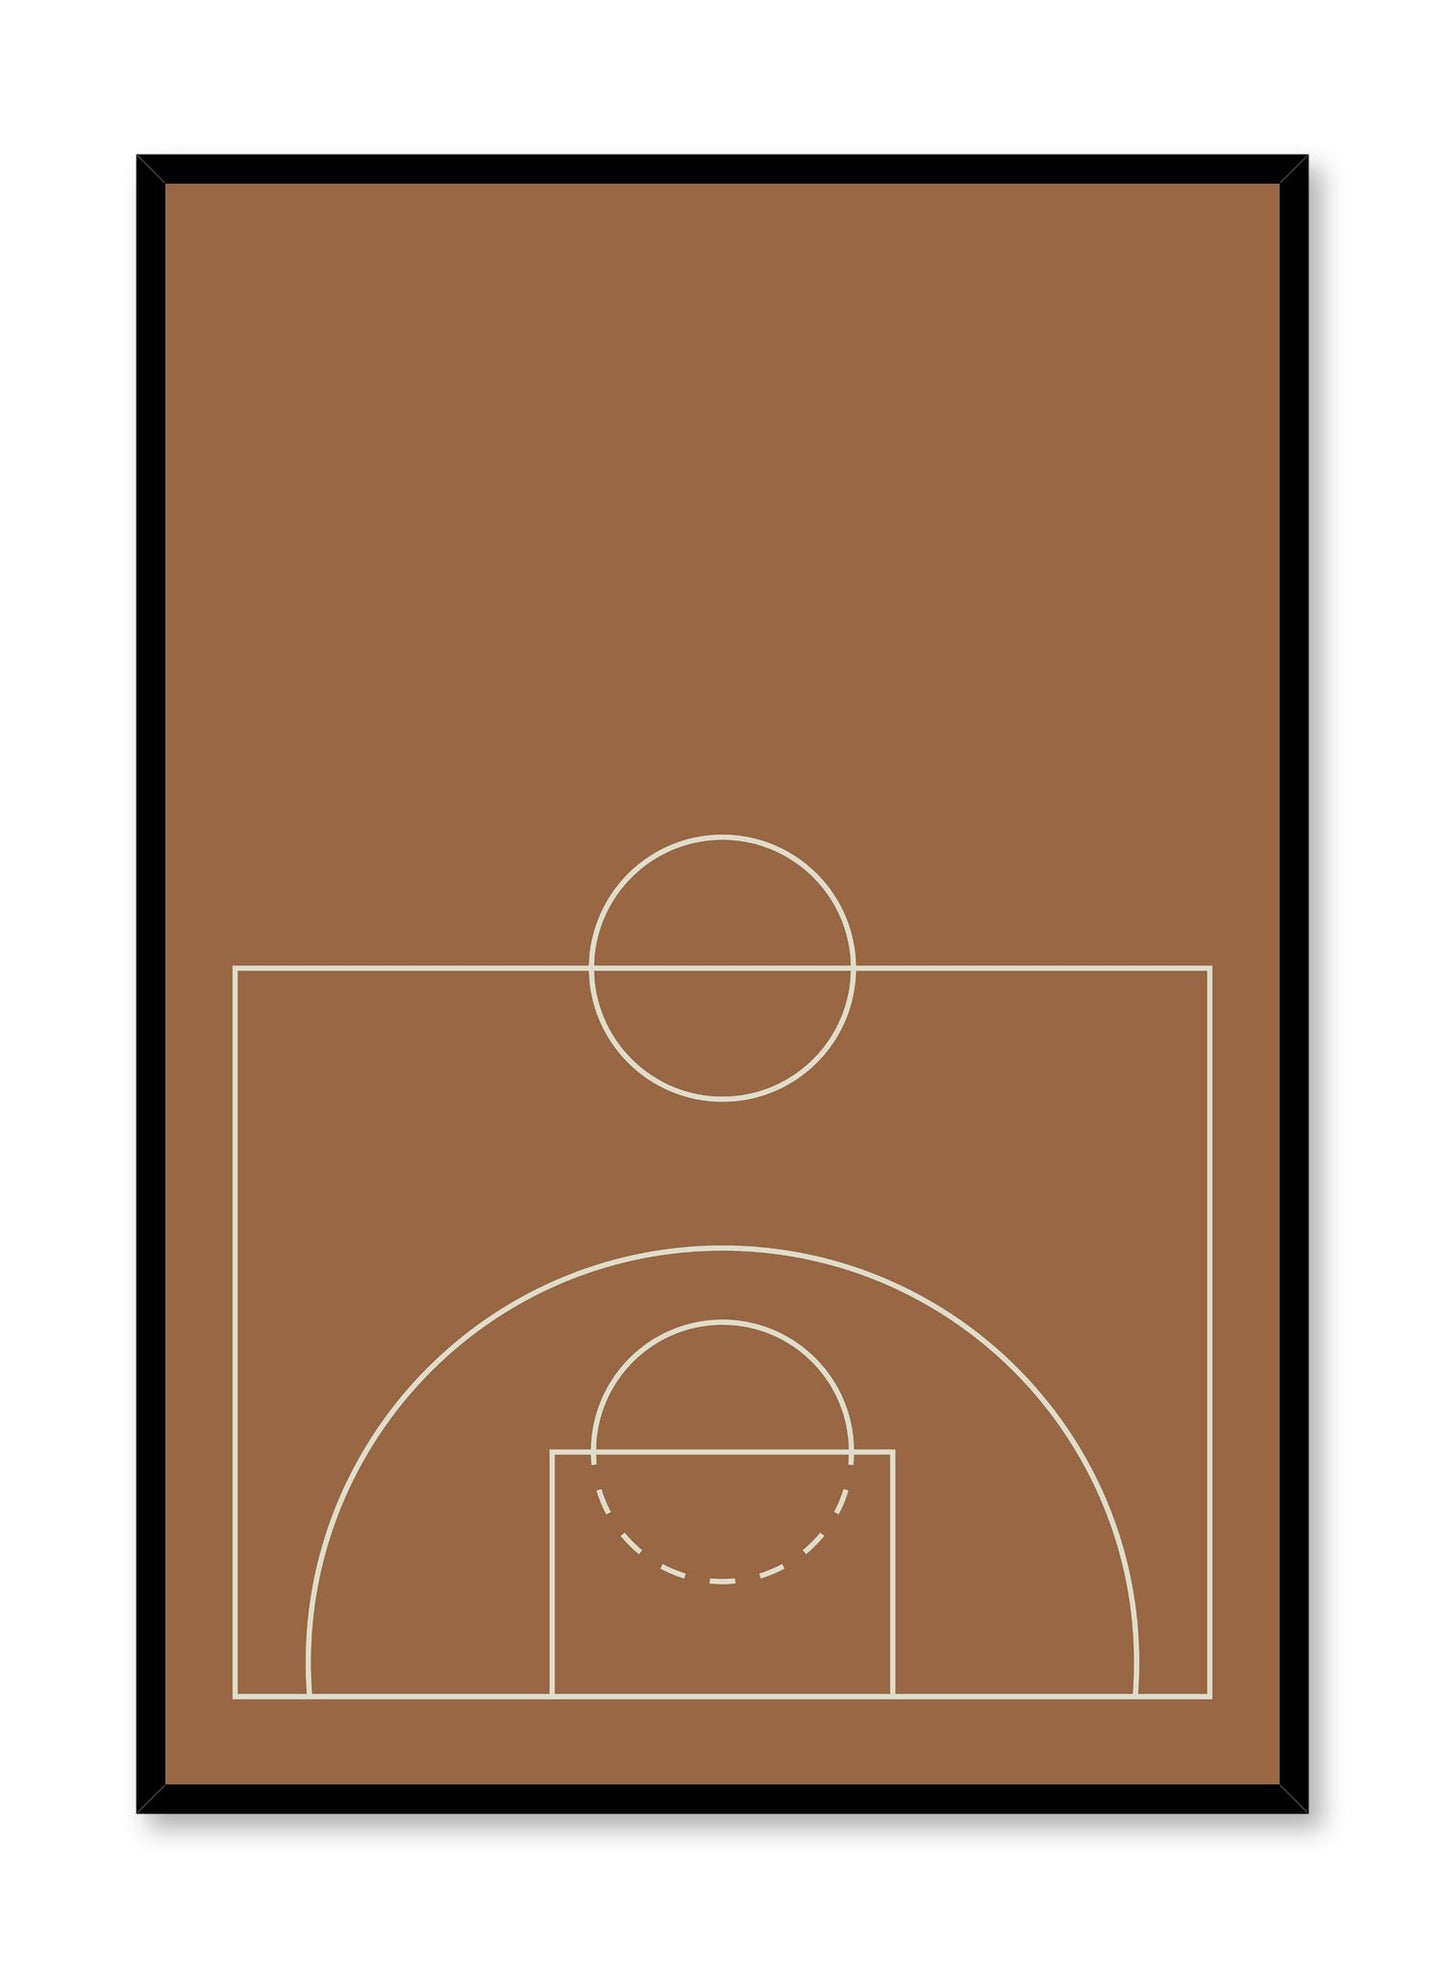 Minimalist design poster by Opposite Wall with Courtside abstract graphic design of basketball court